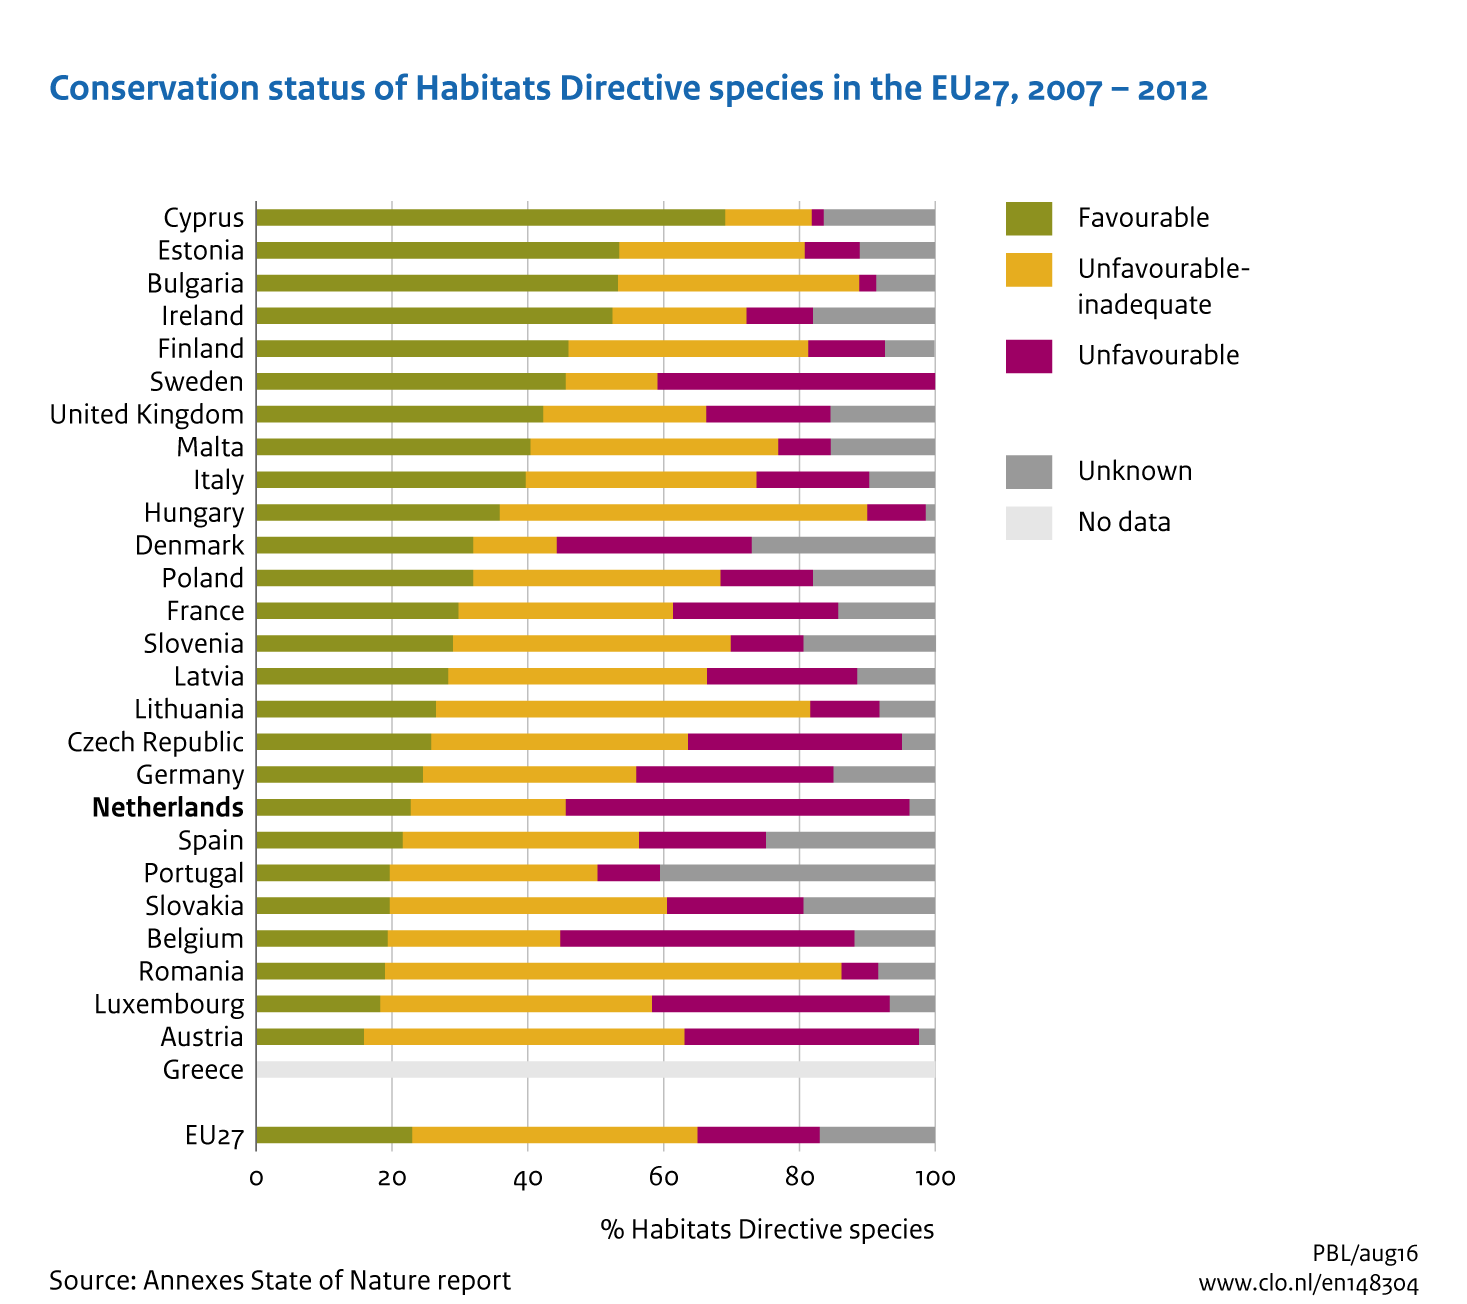 Image Conservation status of Habitats Directive species in EU27. The image is further explained in the text.